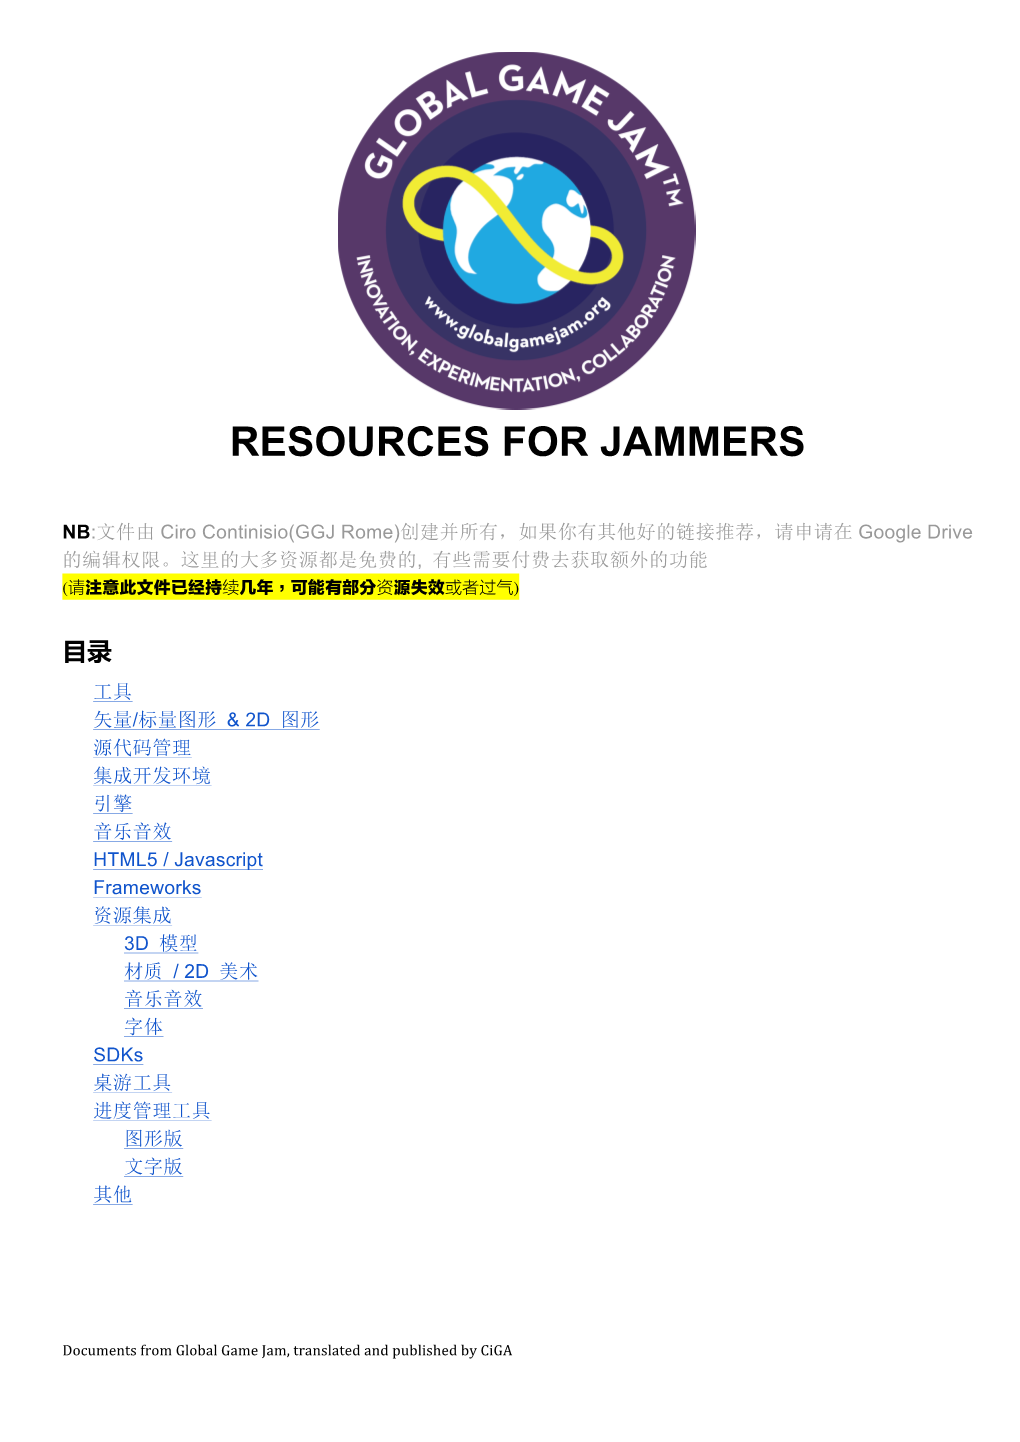 Resources for Jammers